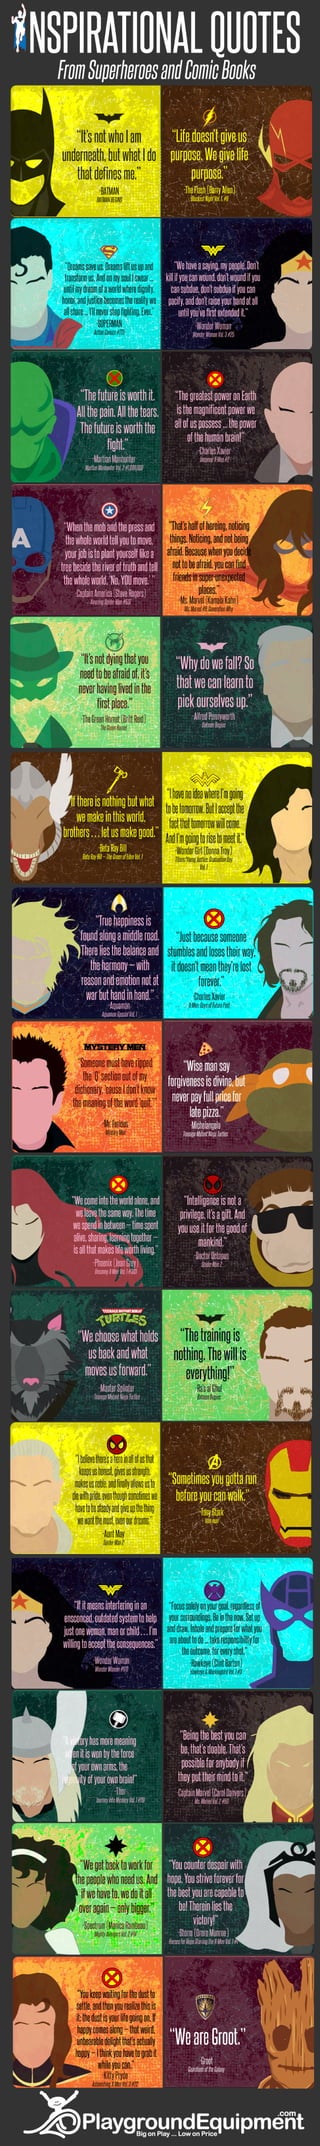 Inspirational Quotes From The World Of Superheroes!